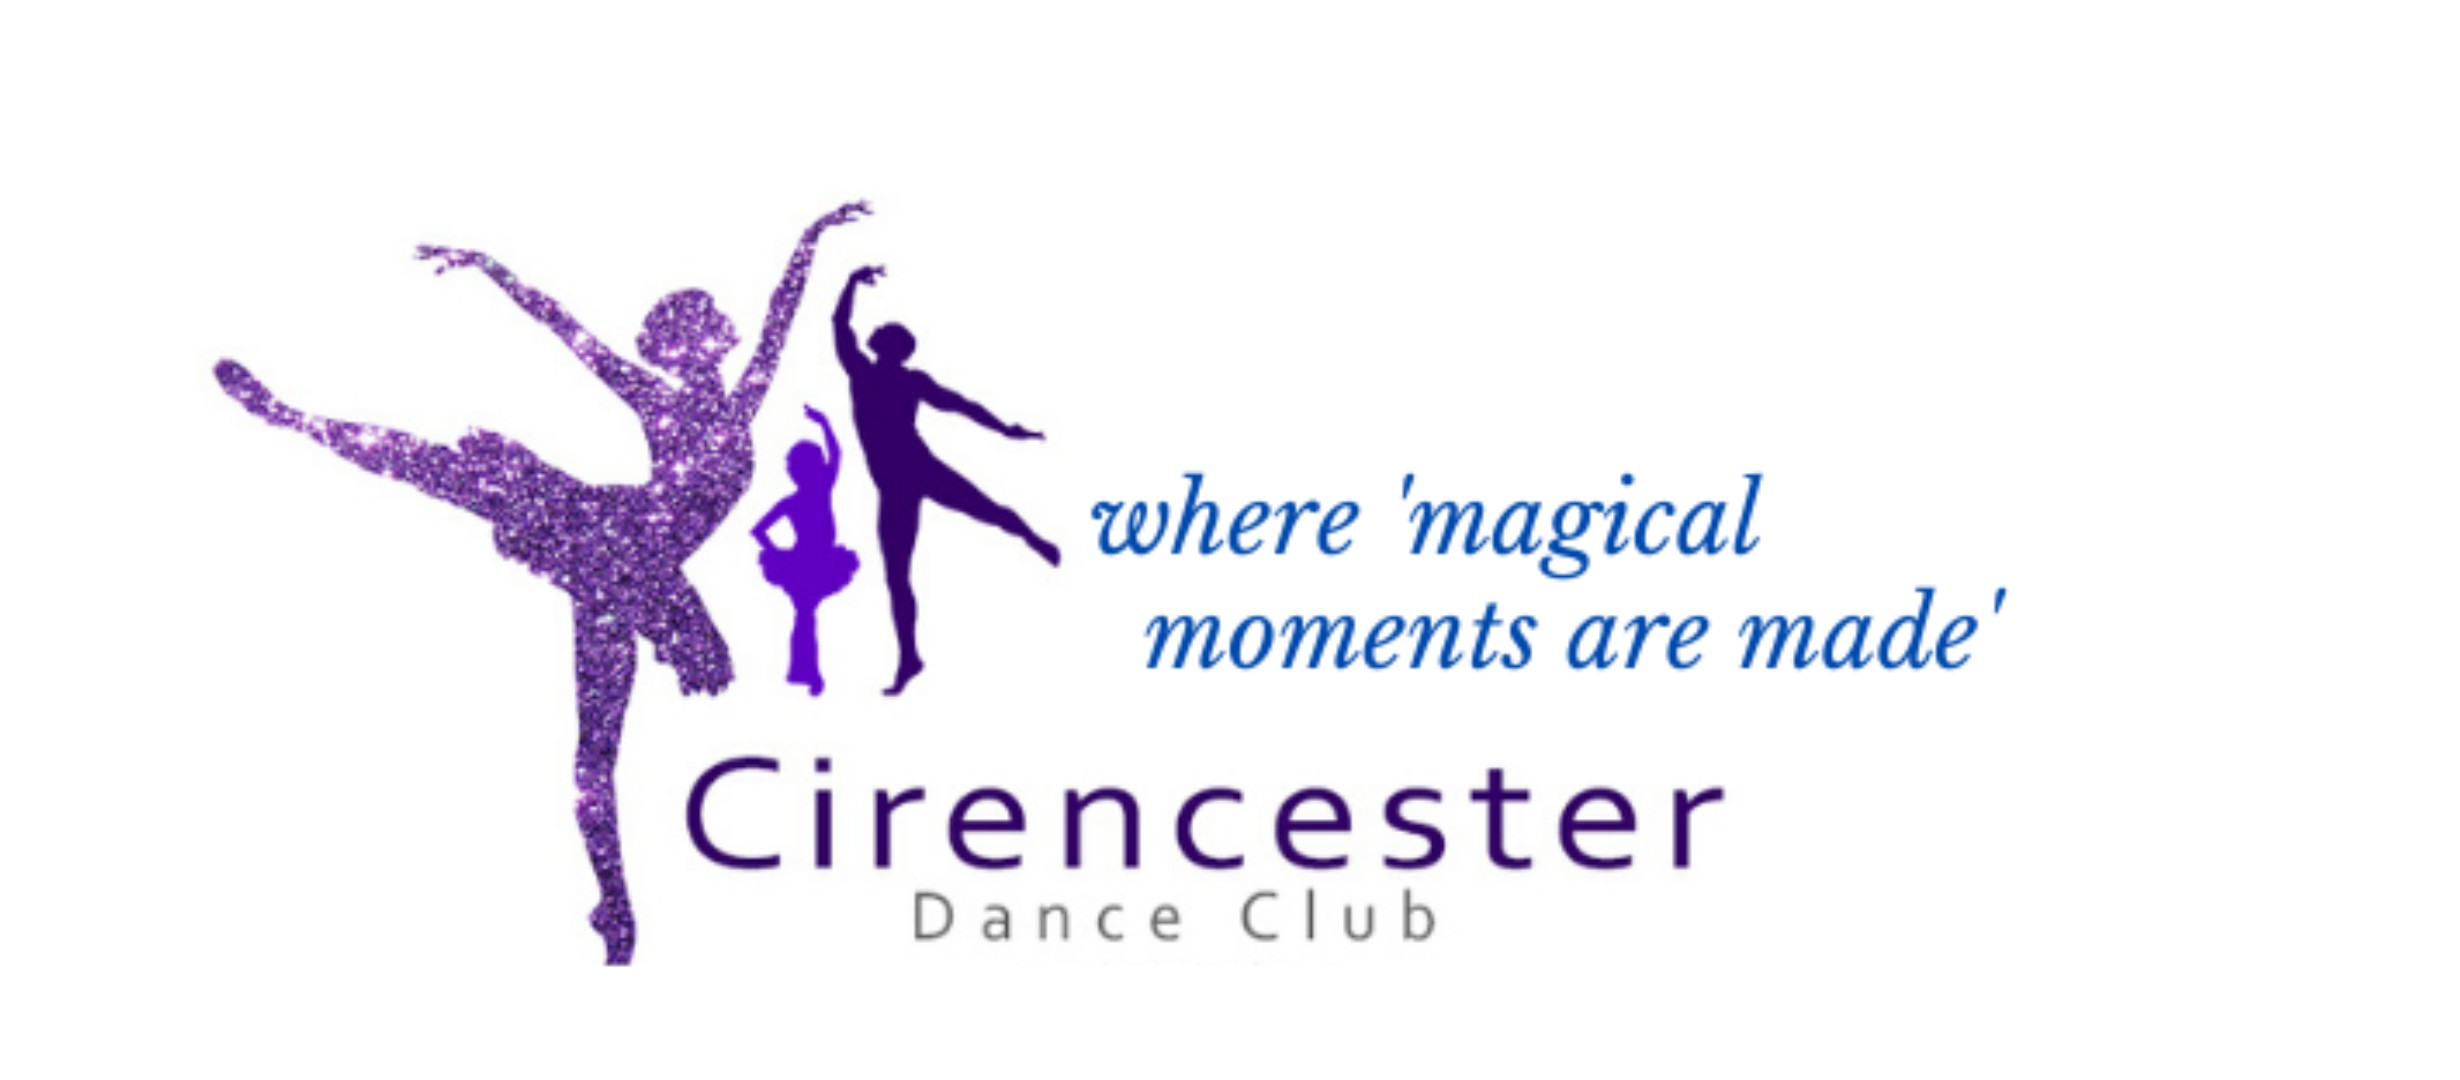 Shows a adult lady and adult man dancing with a child dancer between them, all in shades of purple.  Words read Cirencester Dance Club where magical moments are made